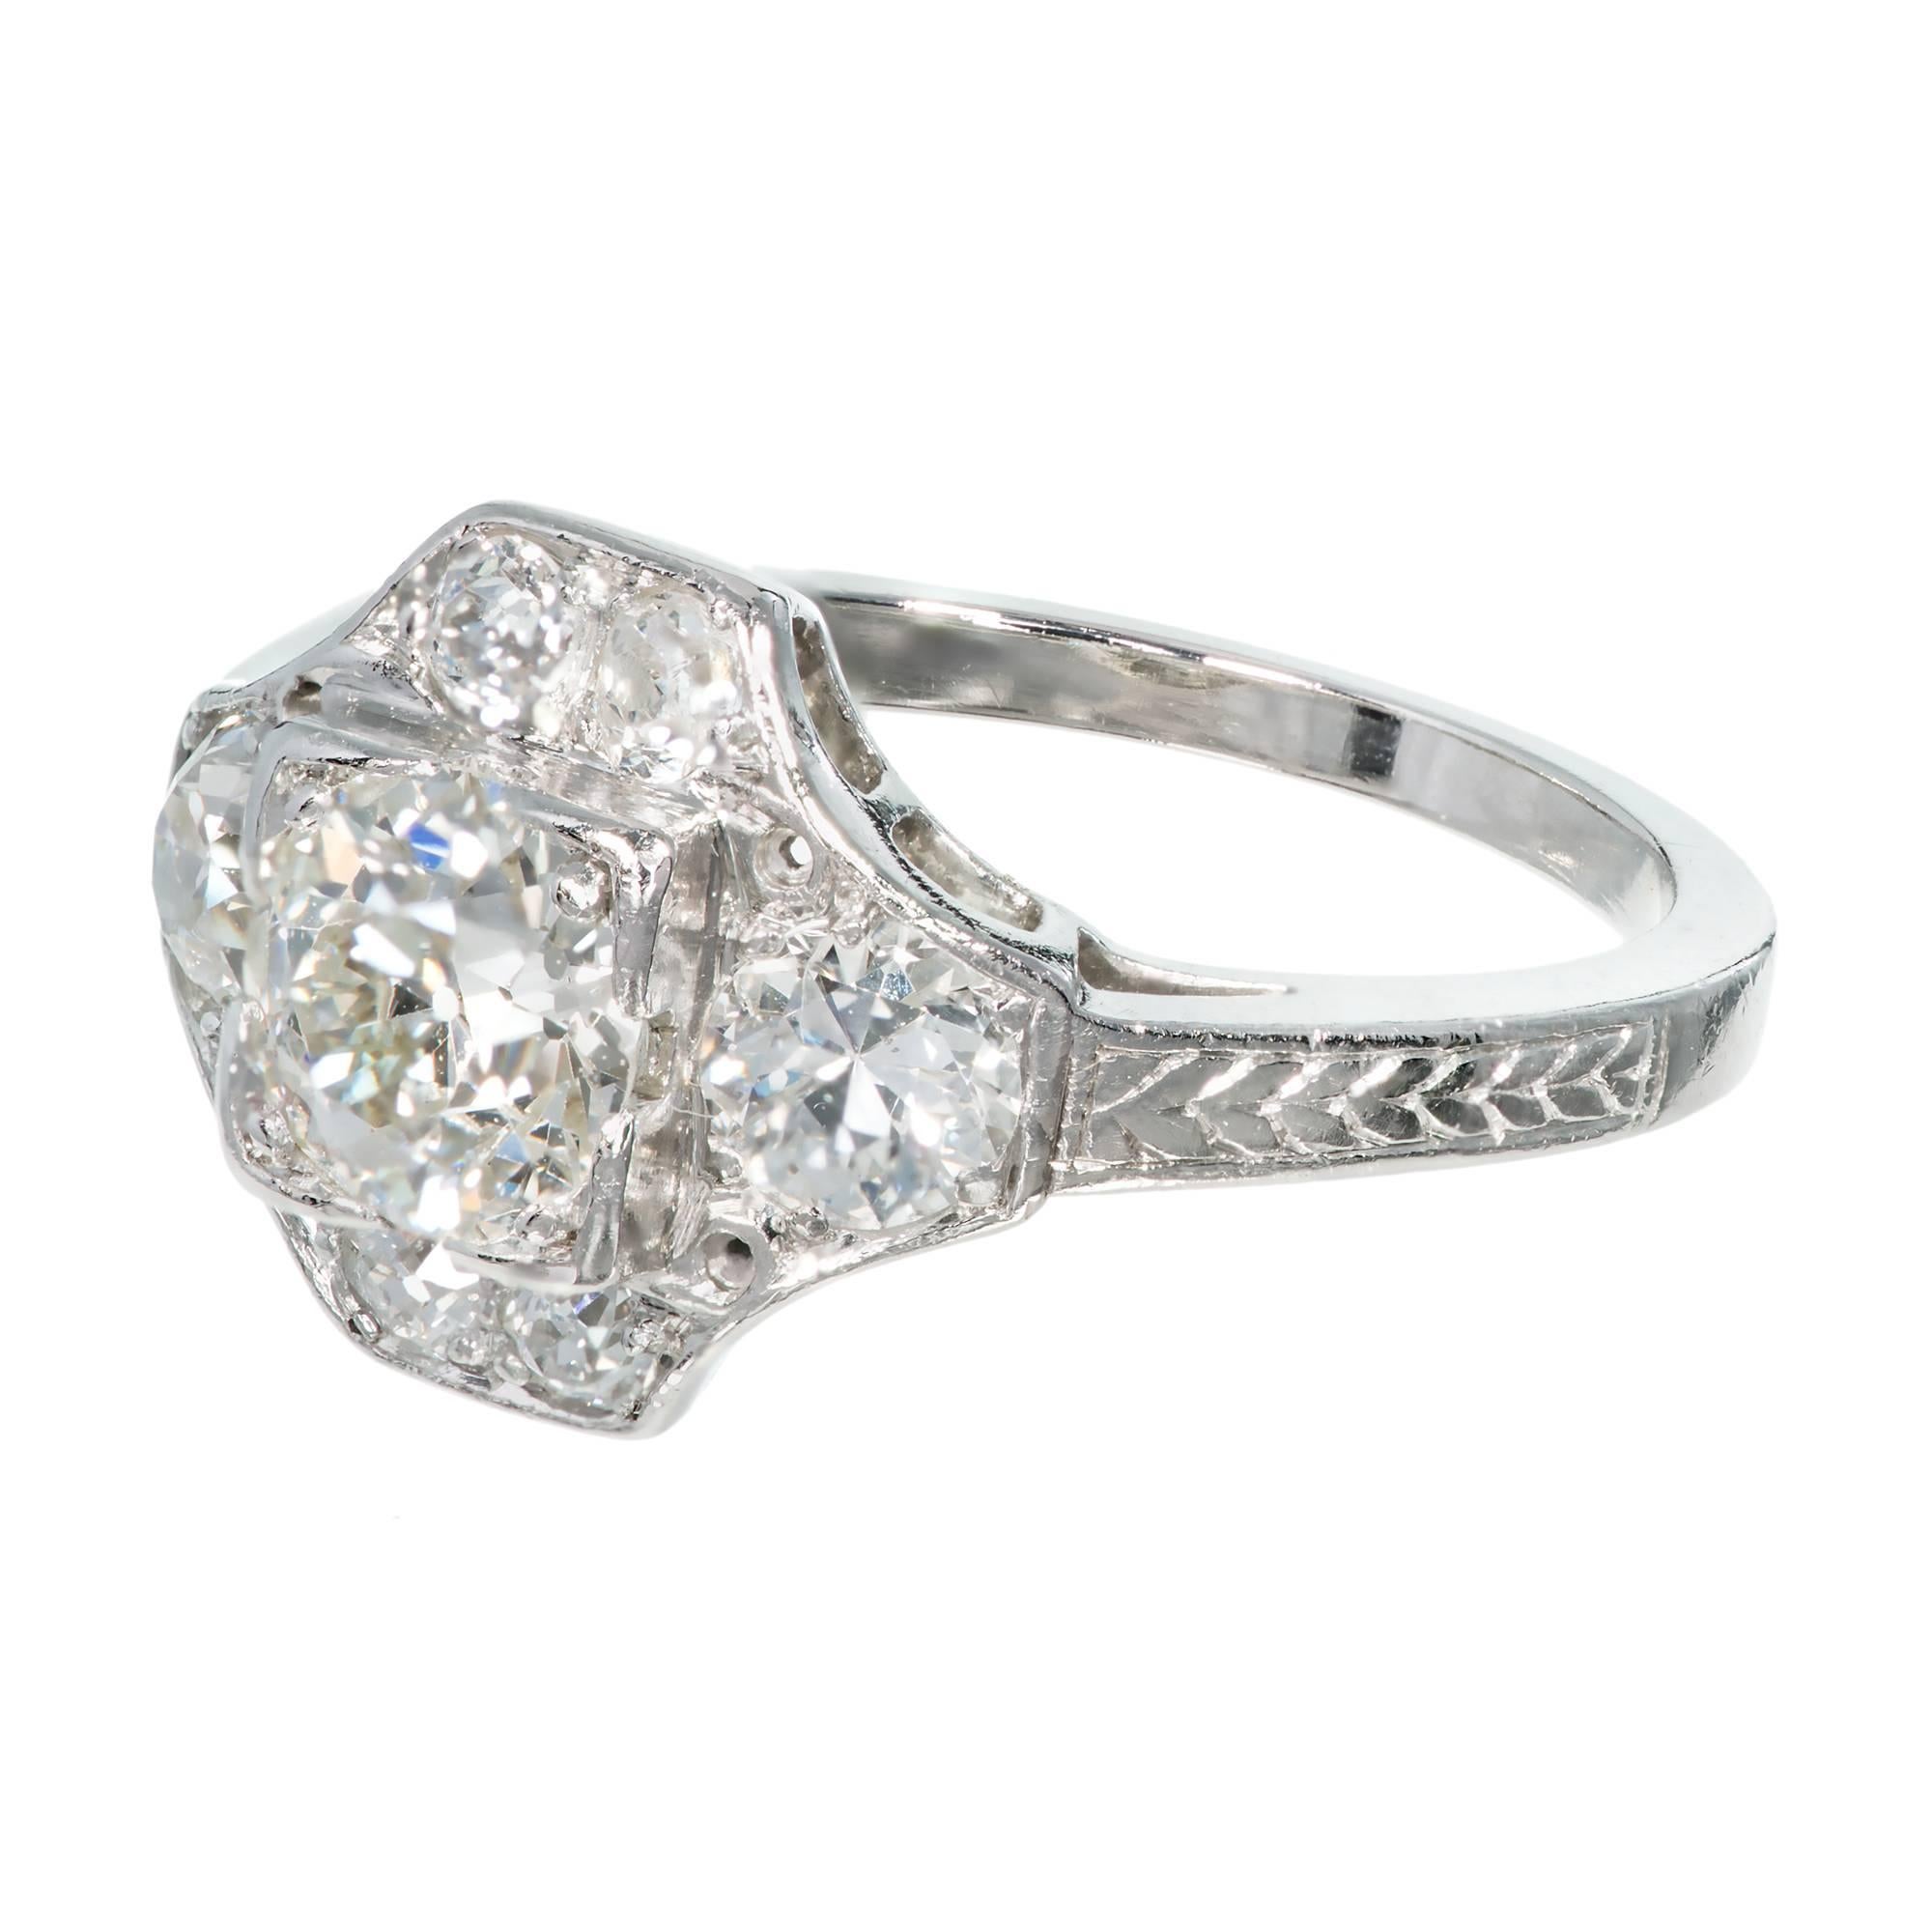 Art Deco 1930's Platinum engagement ring with original old European cut sparkly diamonds. crt

1 Old European cut diamond, approx. total weight .73cts, very bright and sparkly, H to I, SI3 Ideal cut, Depth: 60.2%  Table: 46%, small table and raised